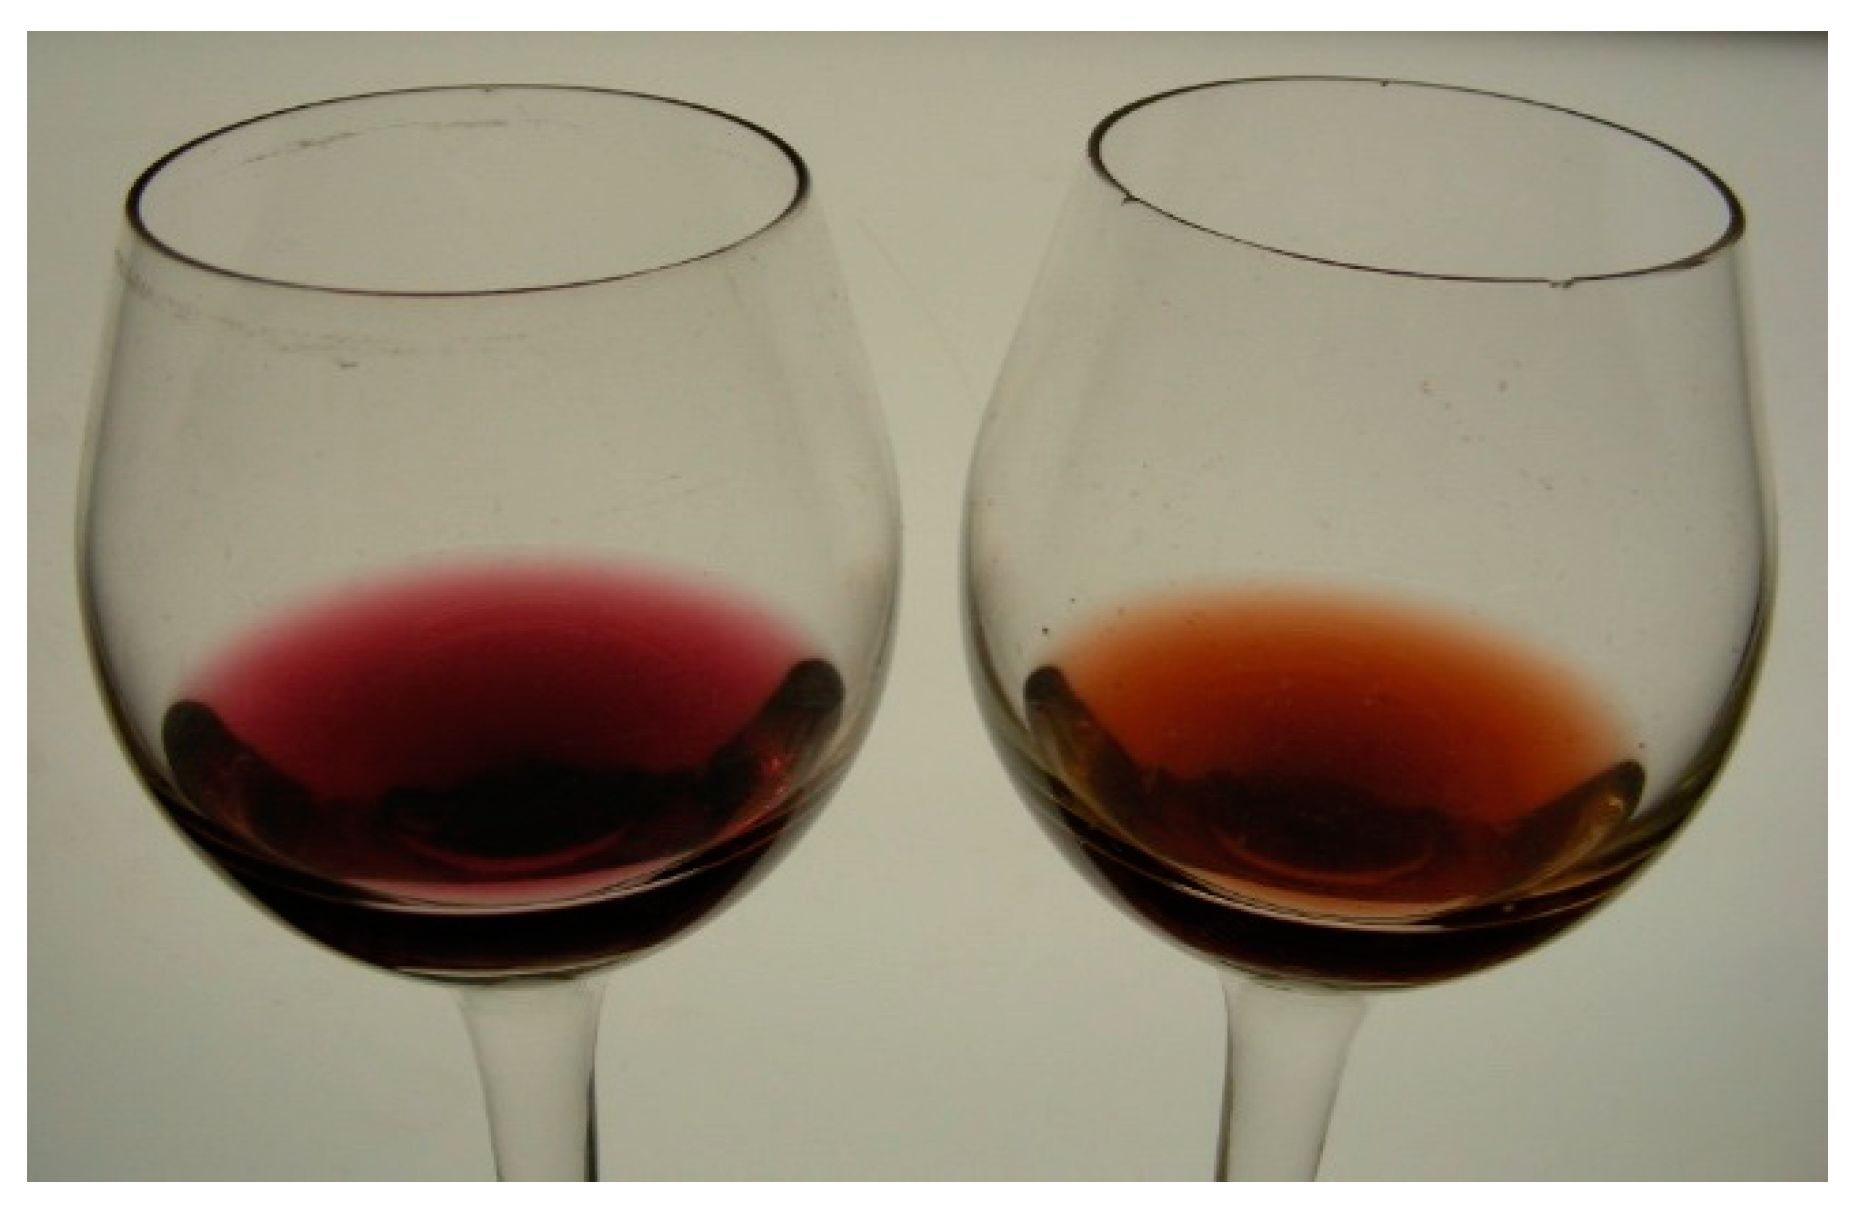 Fermentation | Free Full-Text | Enzymes for Wine Fermentation: Current and  Perspective Applications | HTML